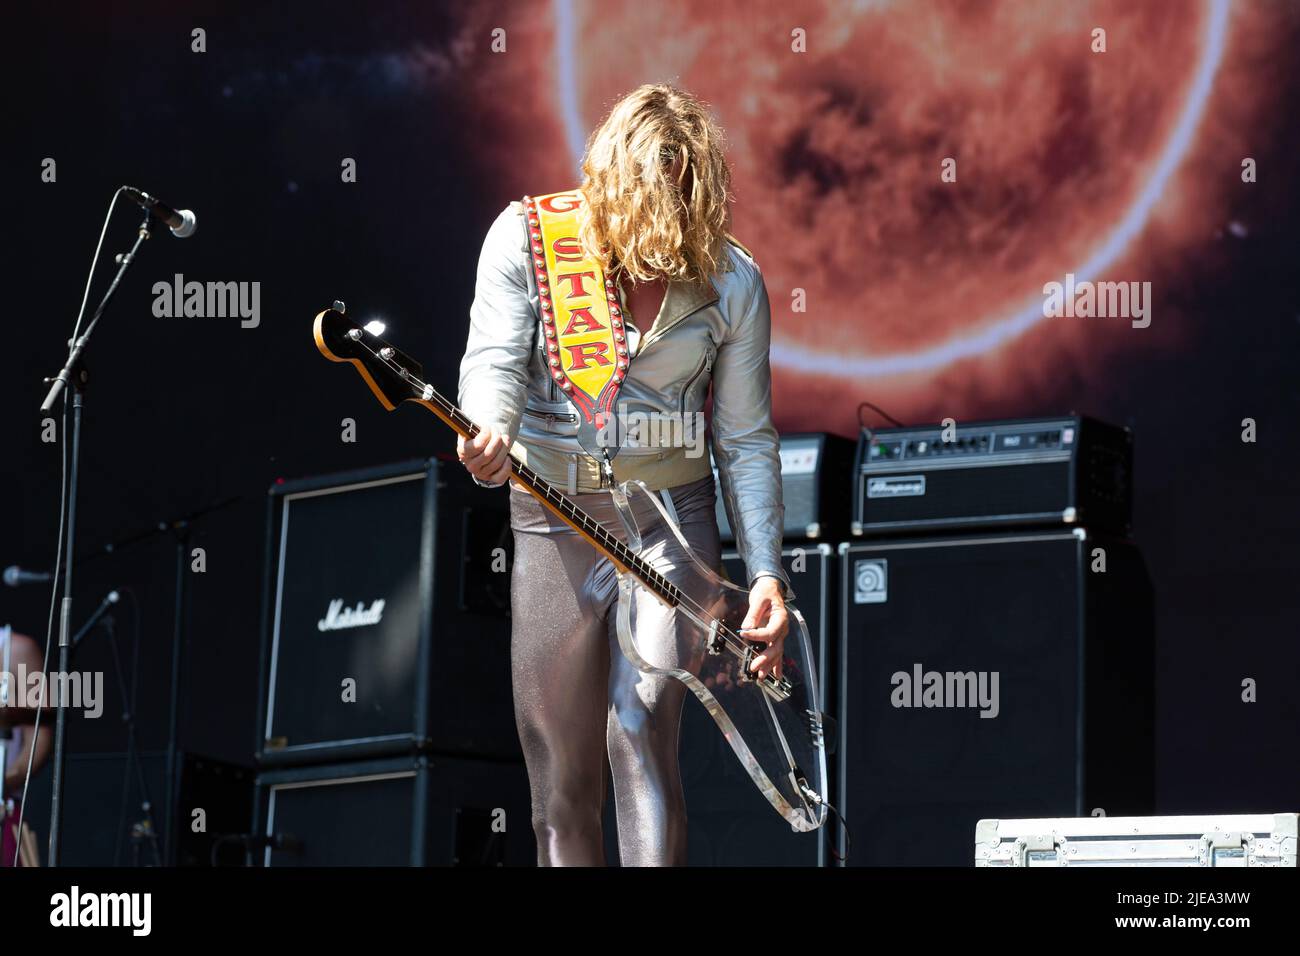 Oslo, Norway. 24th, June 2022. The Danish rock band D-A-D performs a live concert during the Norwegian music festival Tons of Rock 2022 in Oslo. Here bass player Stig Pedersen is seen live on stage. (Photo credit: Gonzales Photo - Per-Otto Oppi). Stock Photo